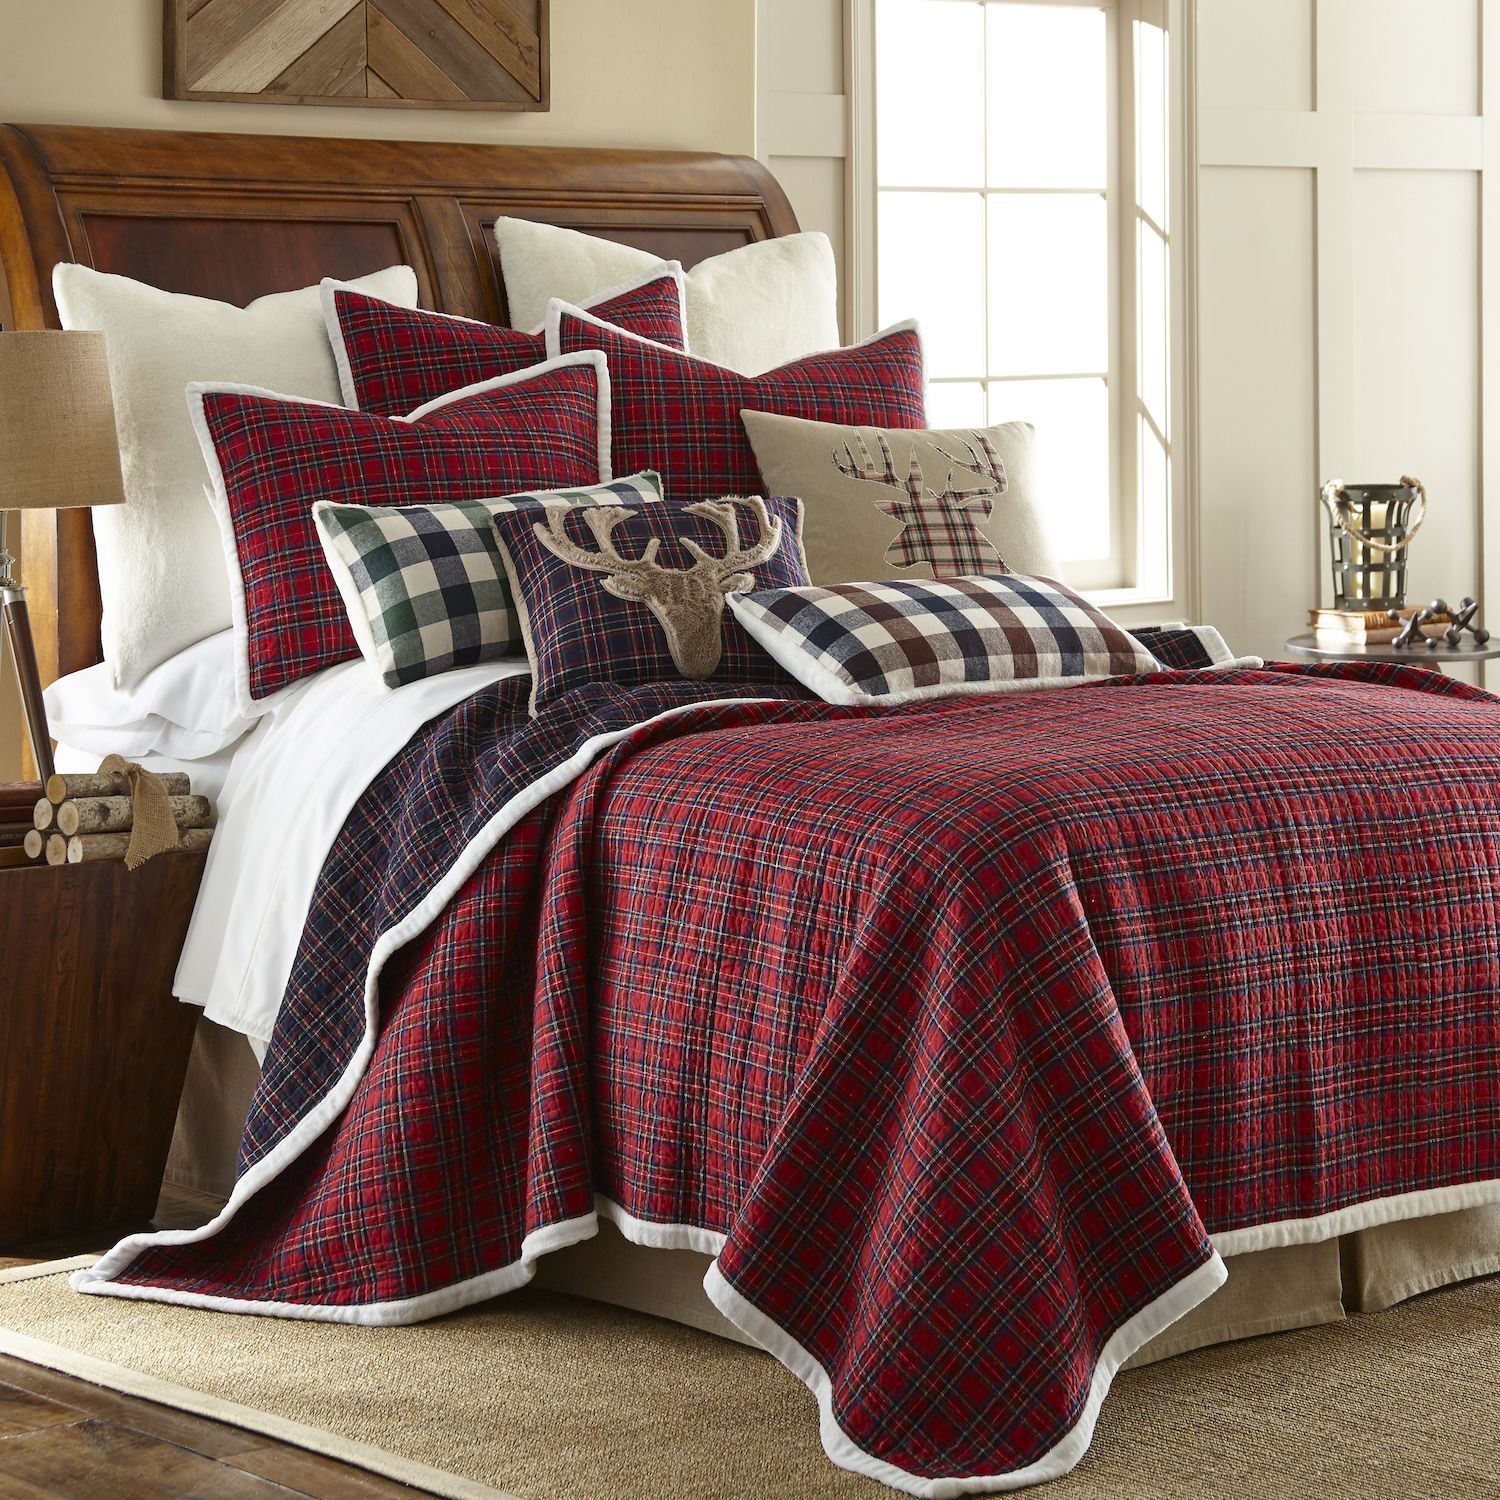 Image for Levtex Home Plaid Sherpa Quilt Set at Kohl's.